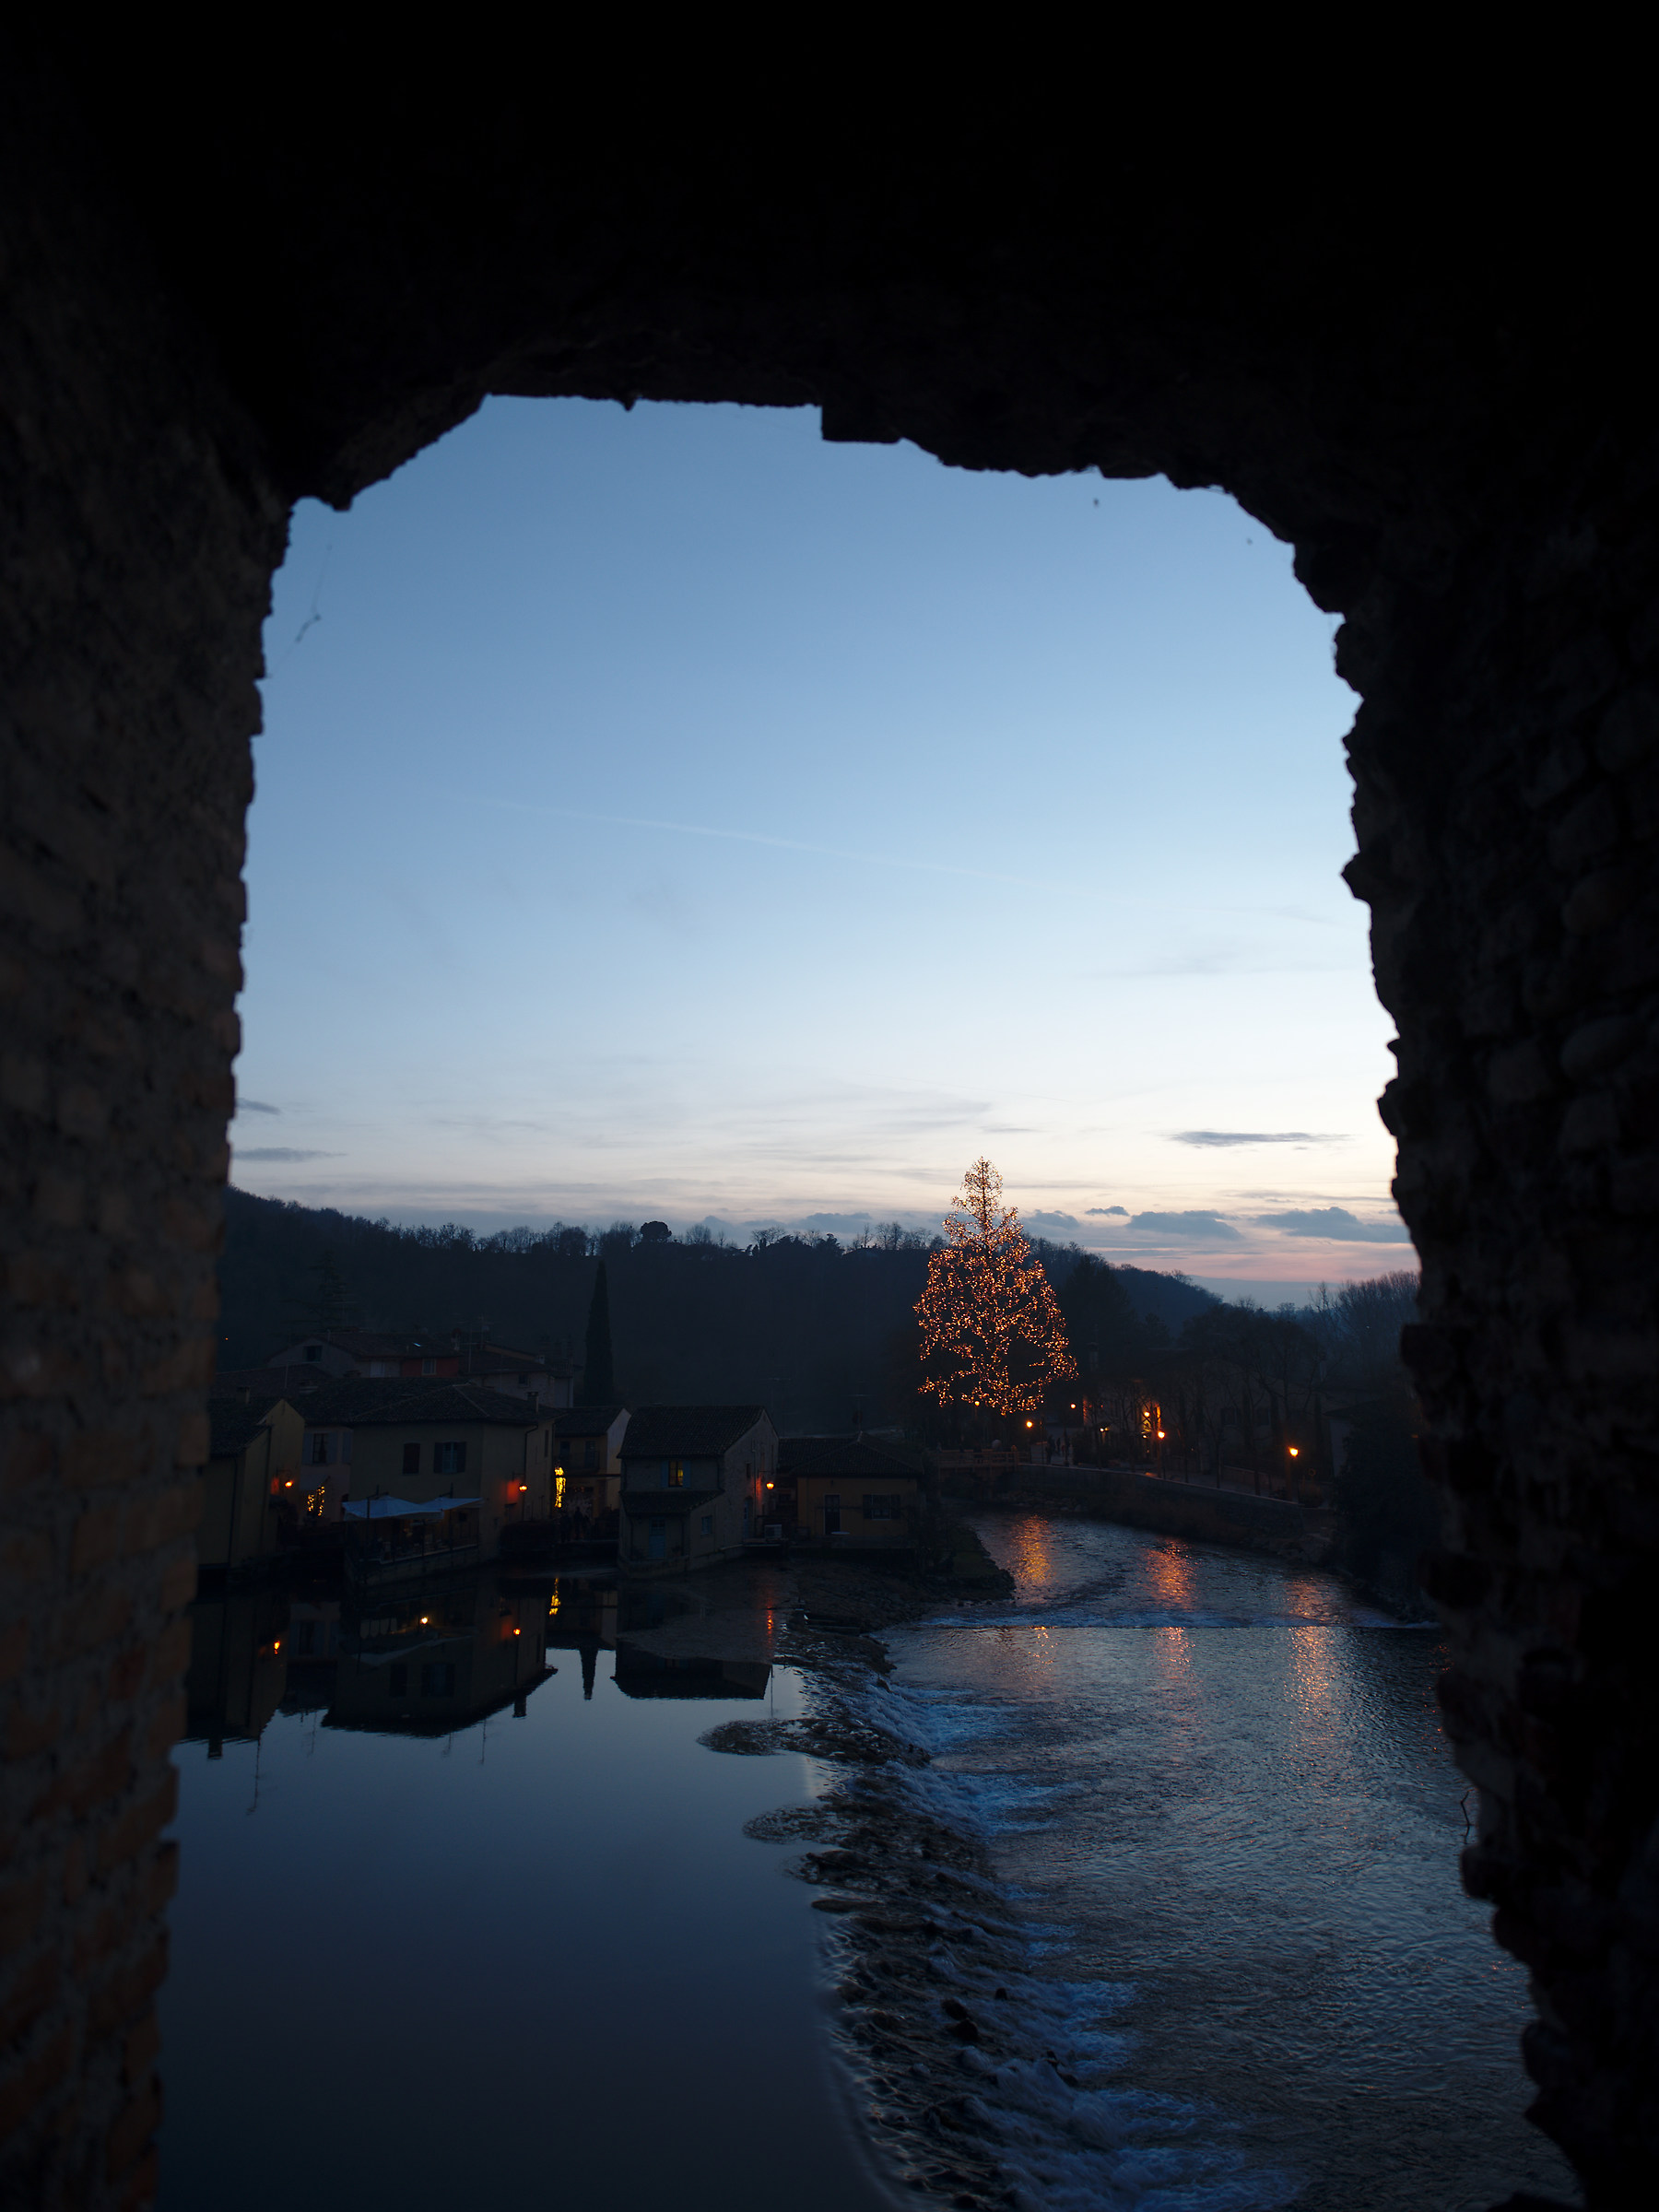 Borghetto after sunset...